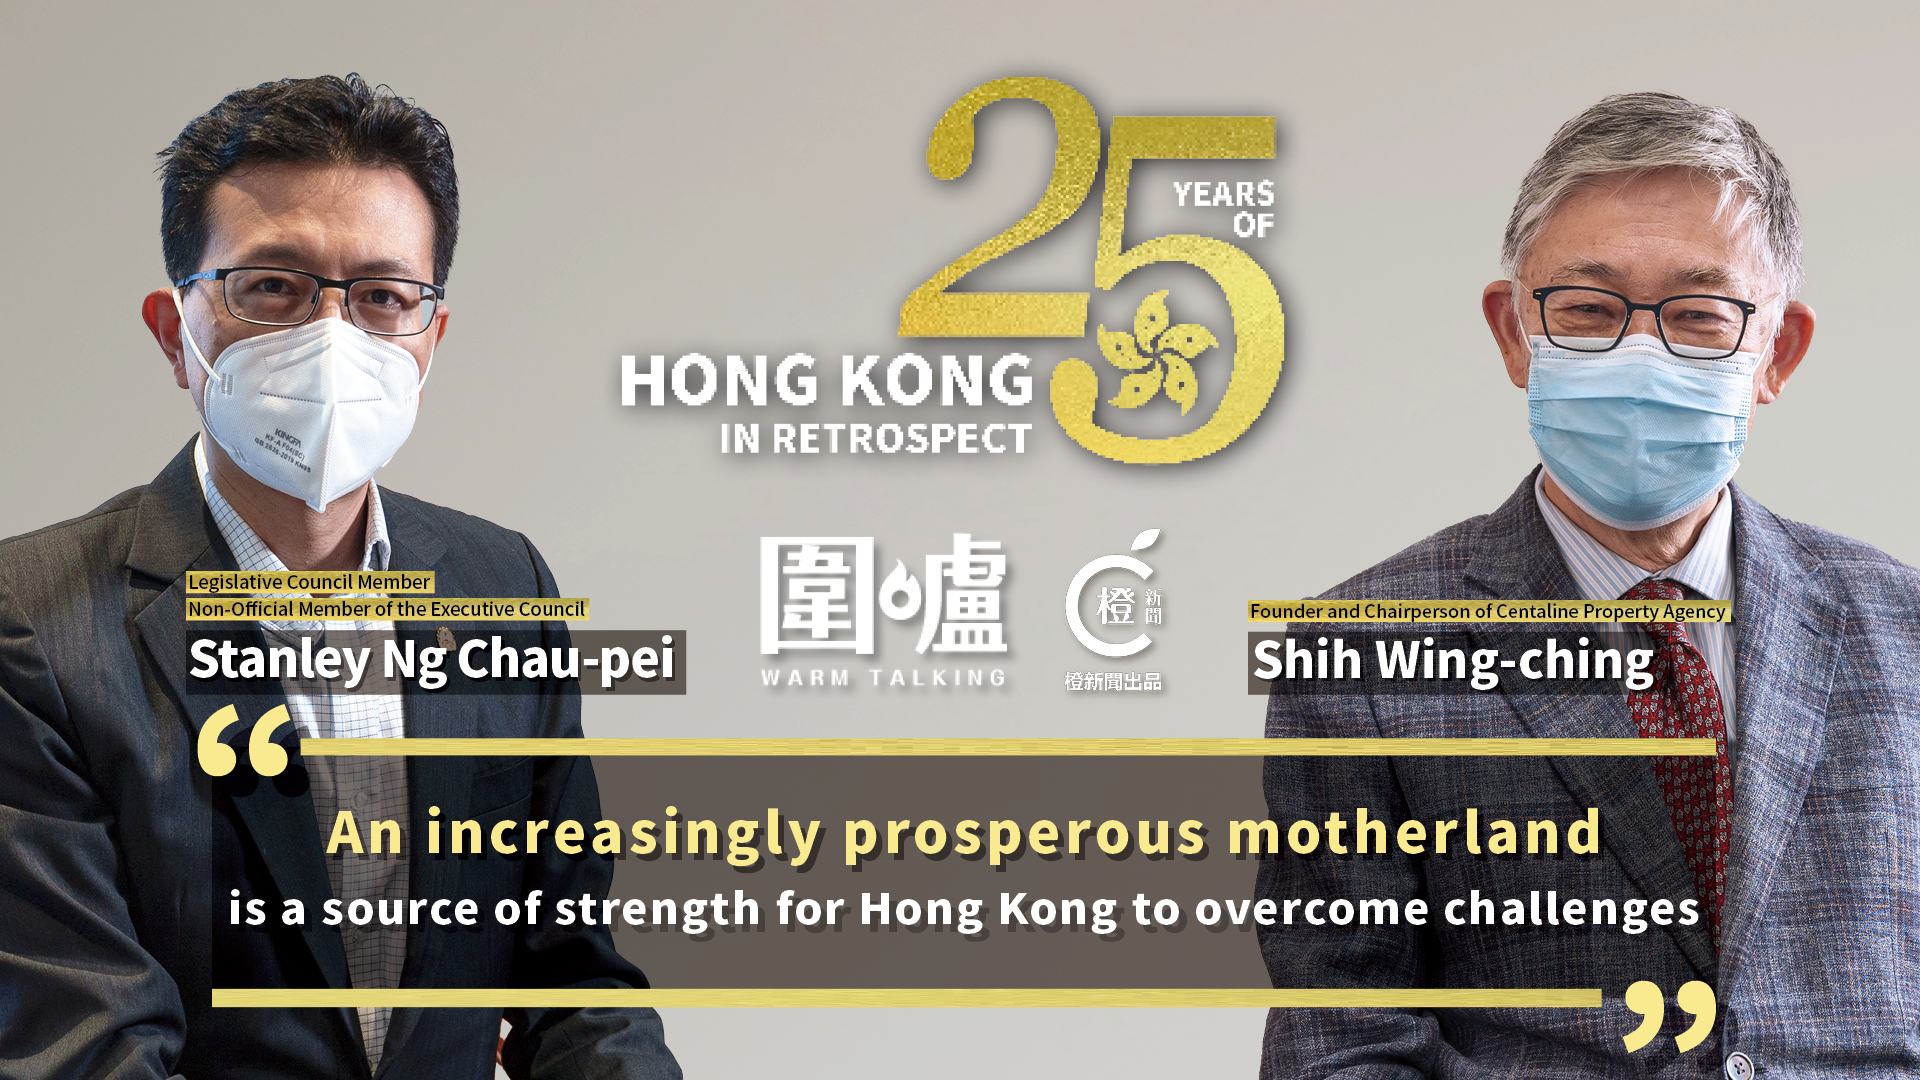 25 Years of HK in Retrospect｜Shih Wing-ching & Stanley Ng Chau-pei